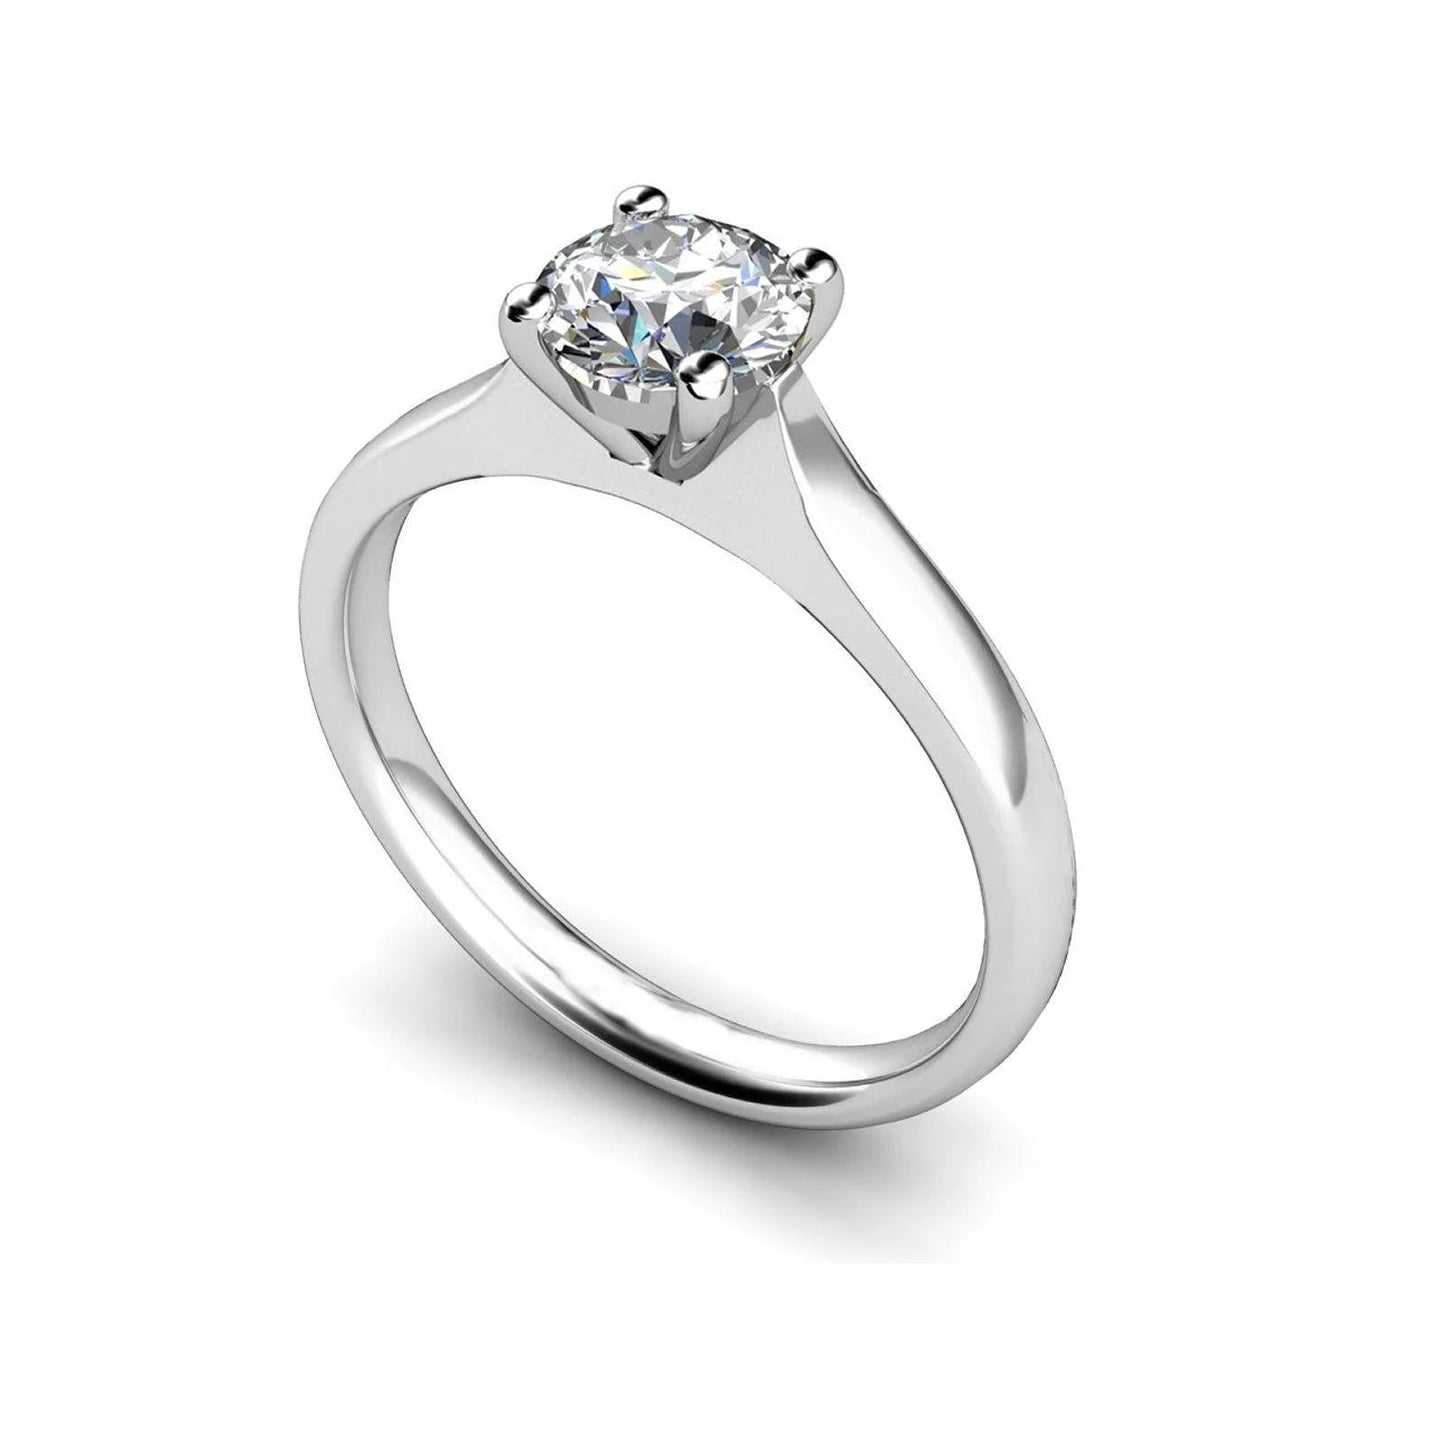 2 Carat Solitaire Real Diamond Anniversary Ring White Gold 14K